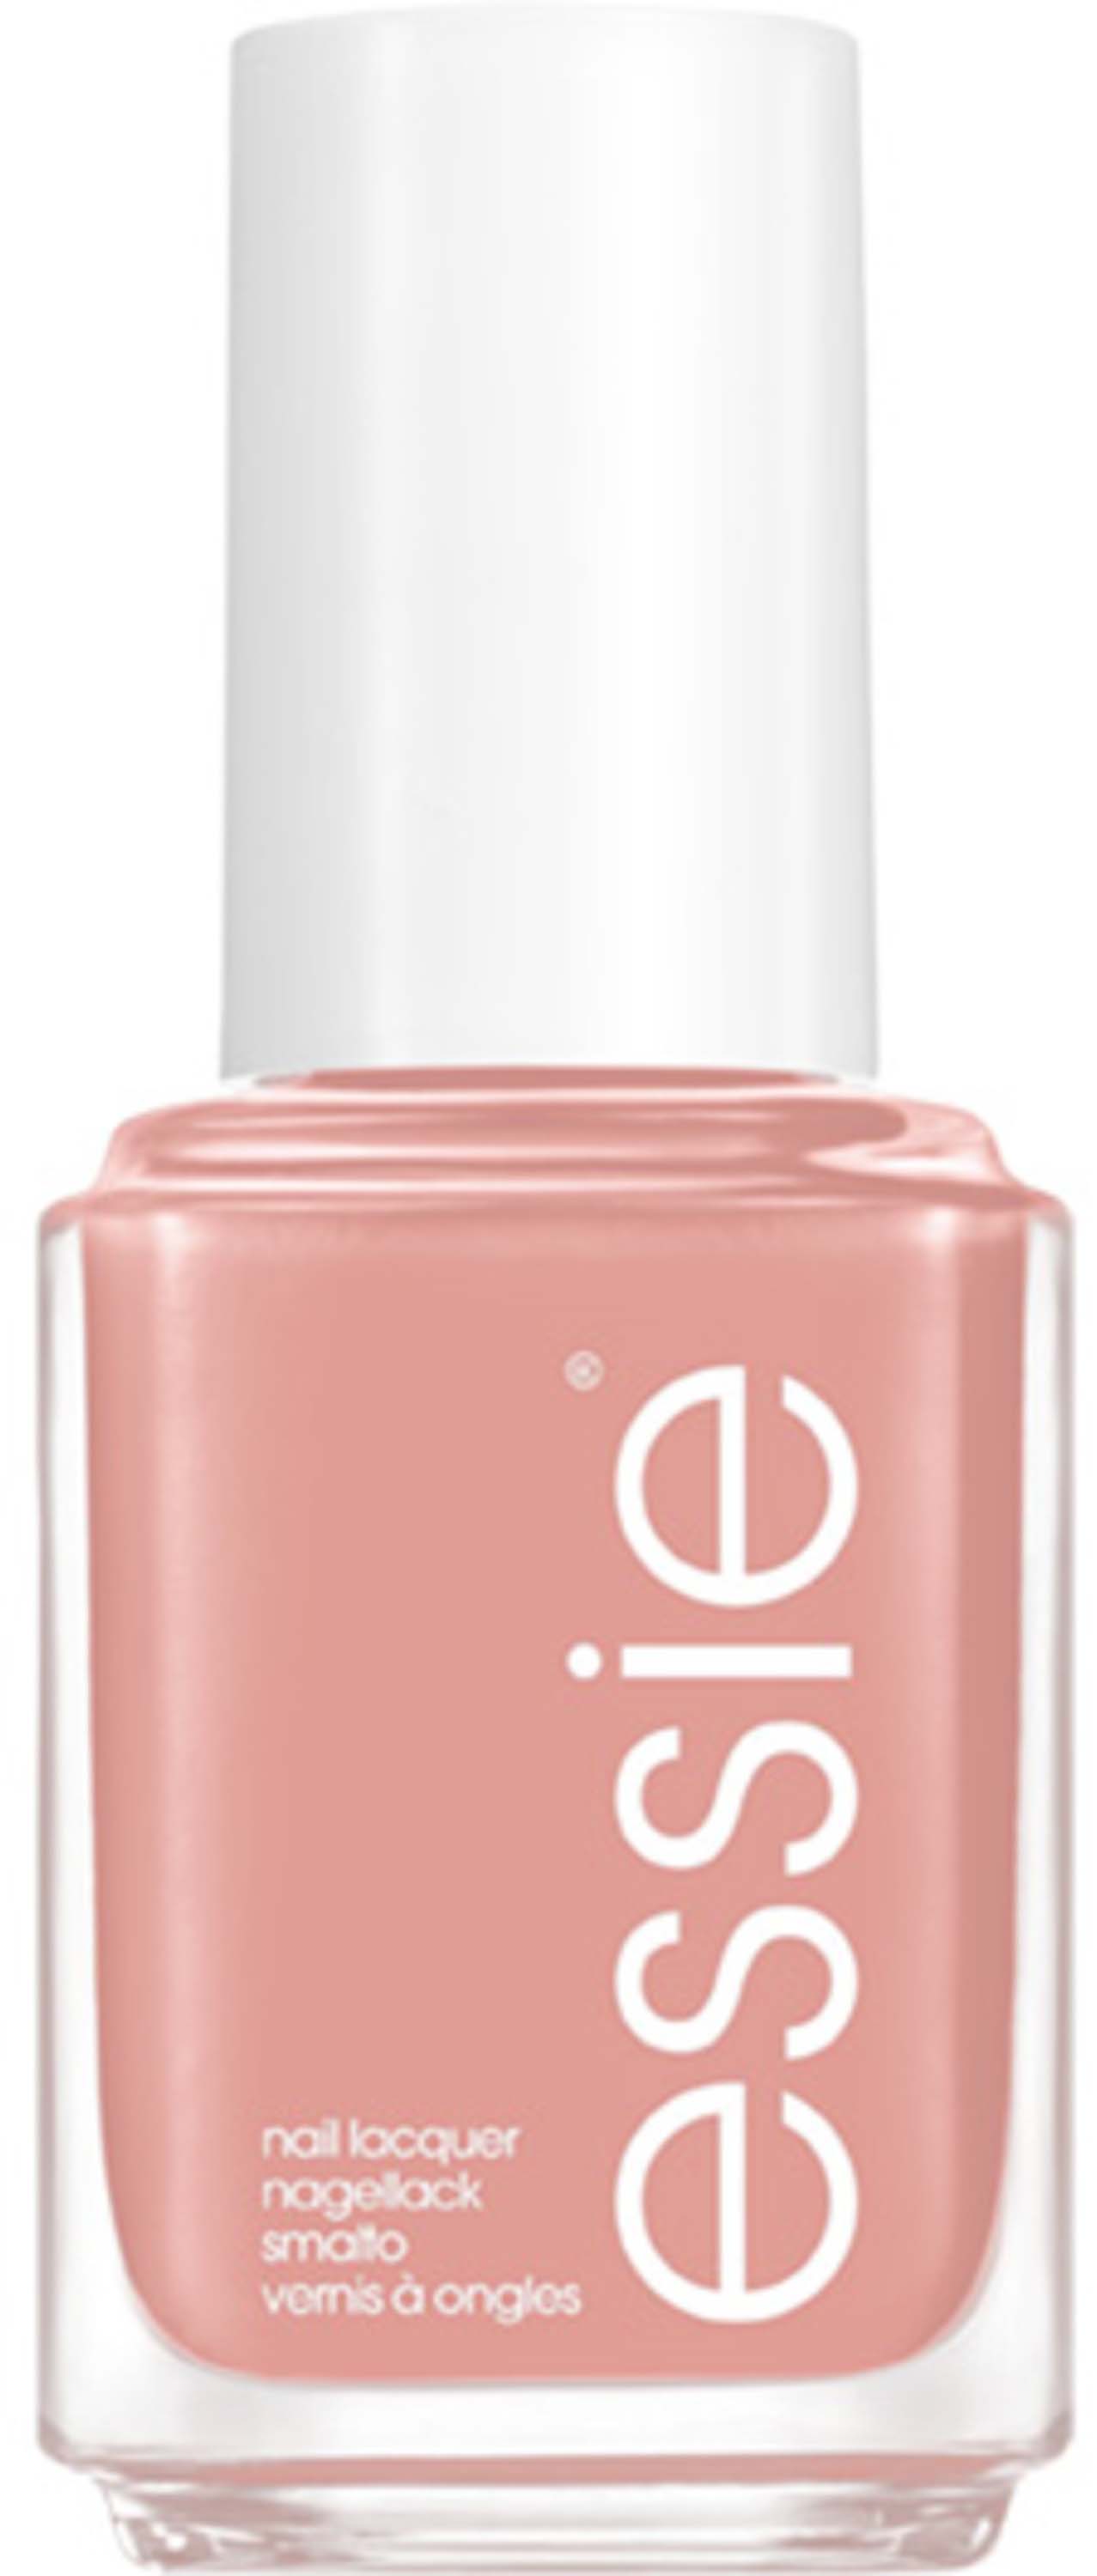 Essie not collection Real Nail 749 Lacquer for Is Snuggle red-y The bed